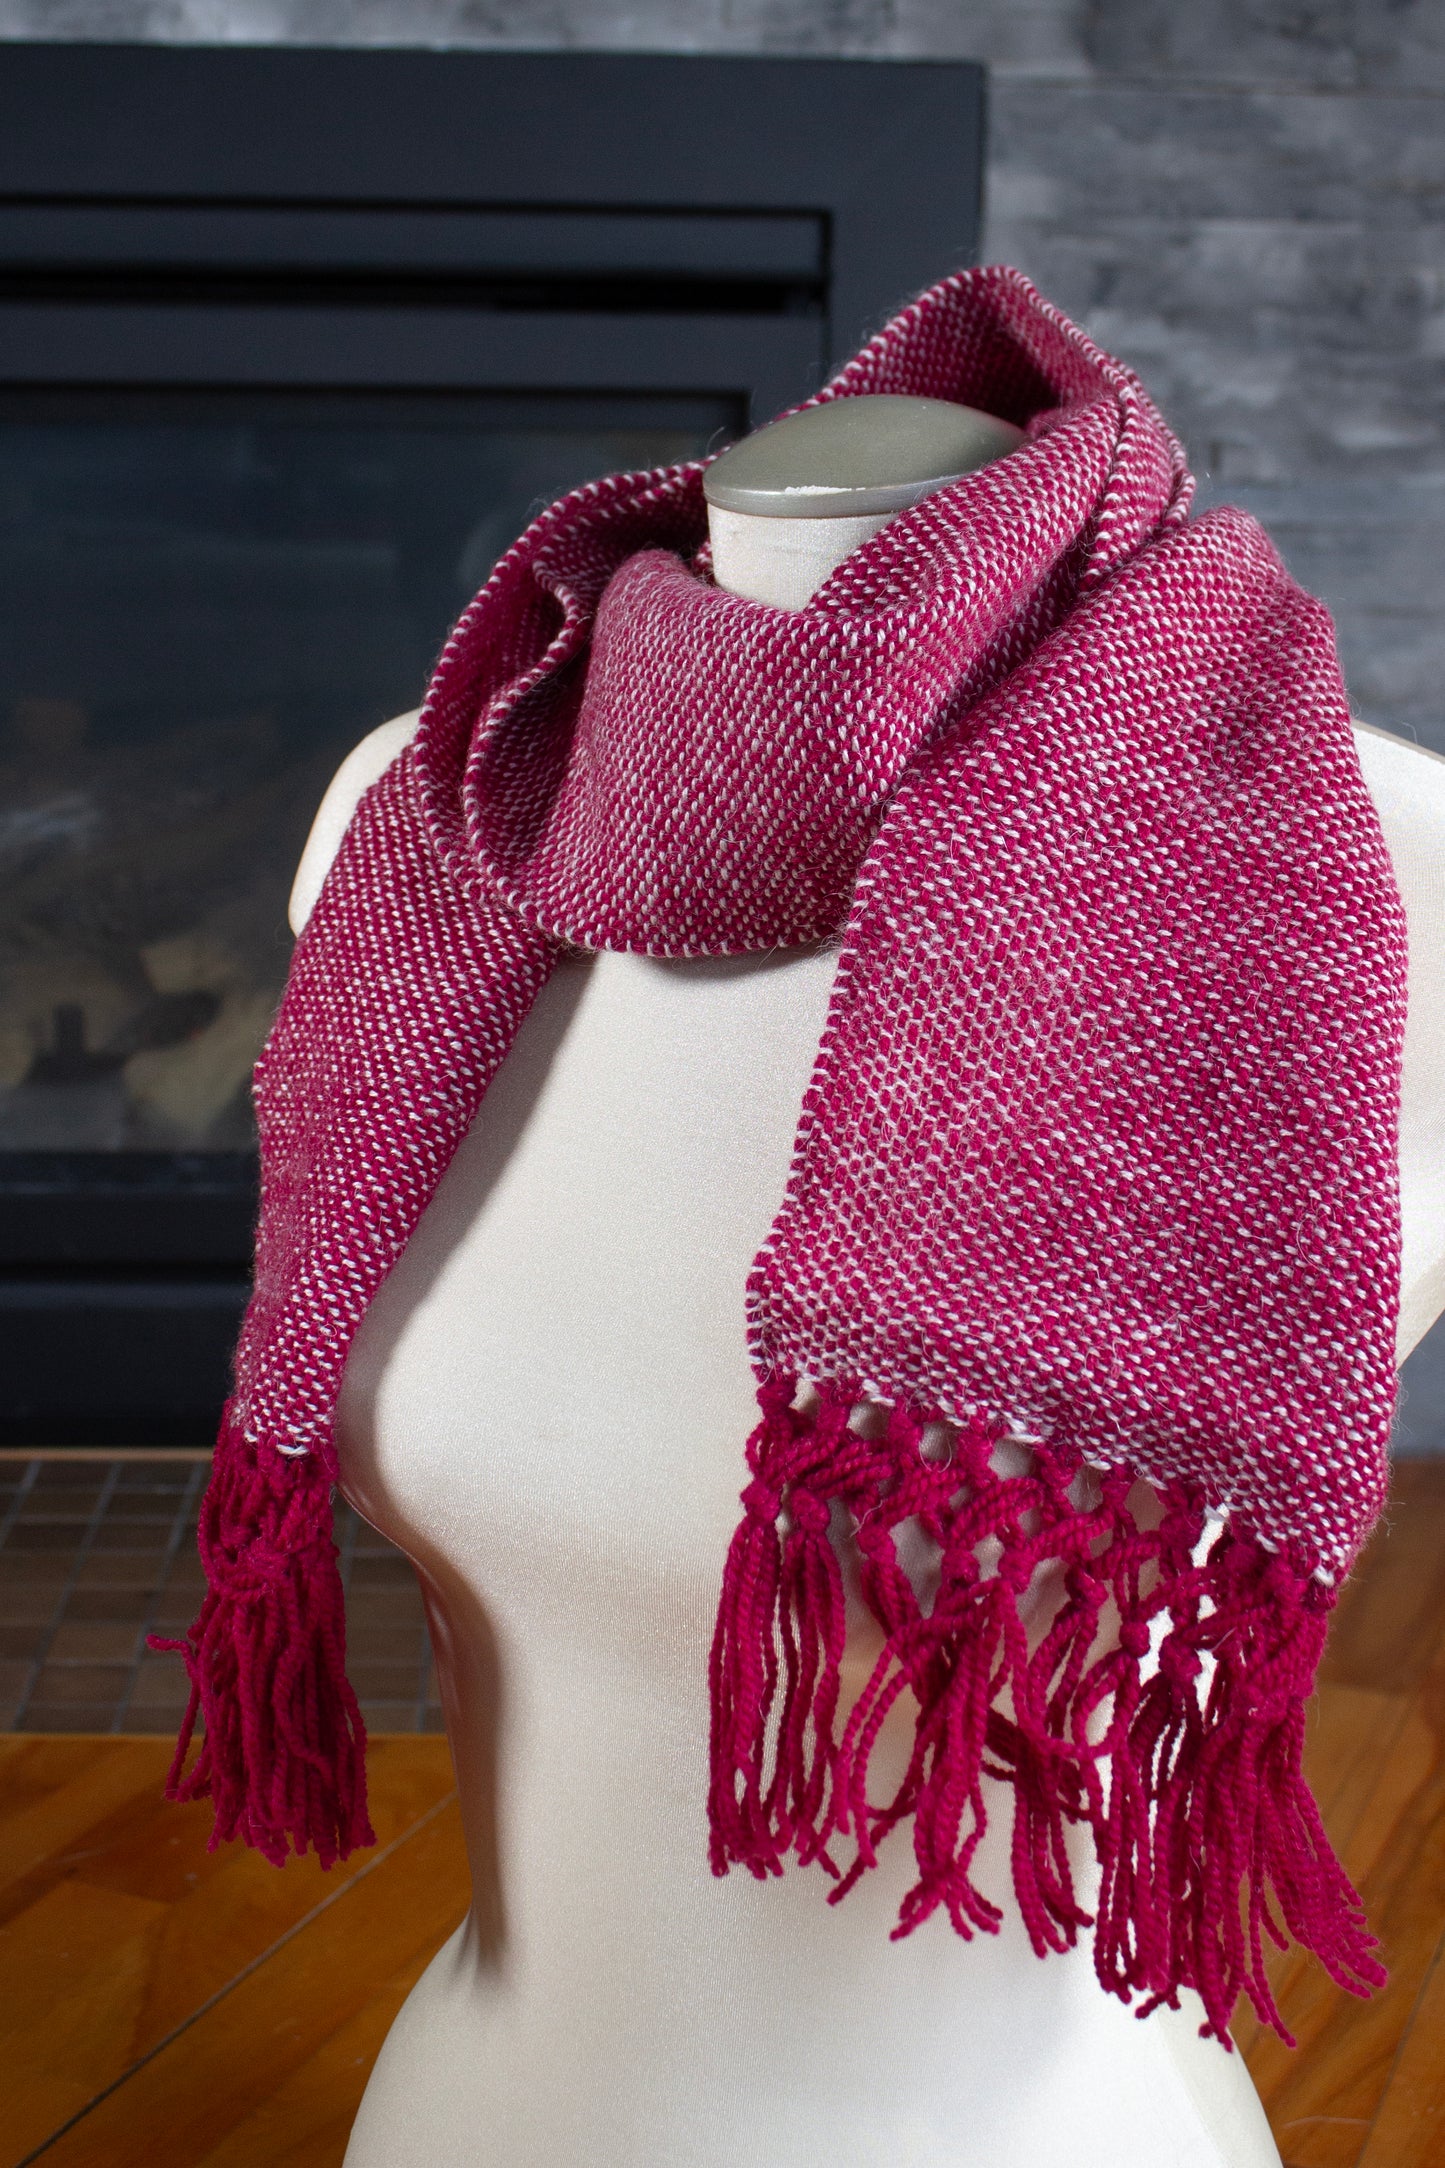 Wool scarf, magenta decorative fringe, white, undyed, off-white, handmade, natural fibres, mohair, locally sourced, woven in Canada